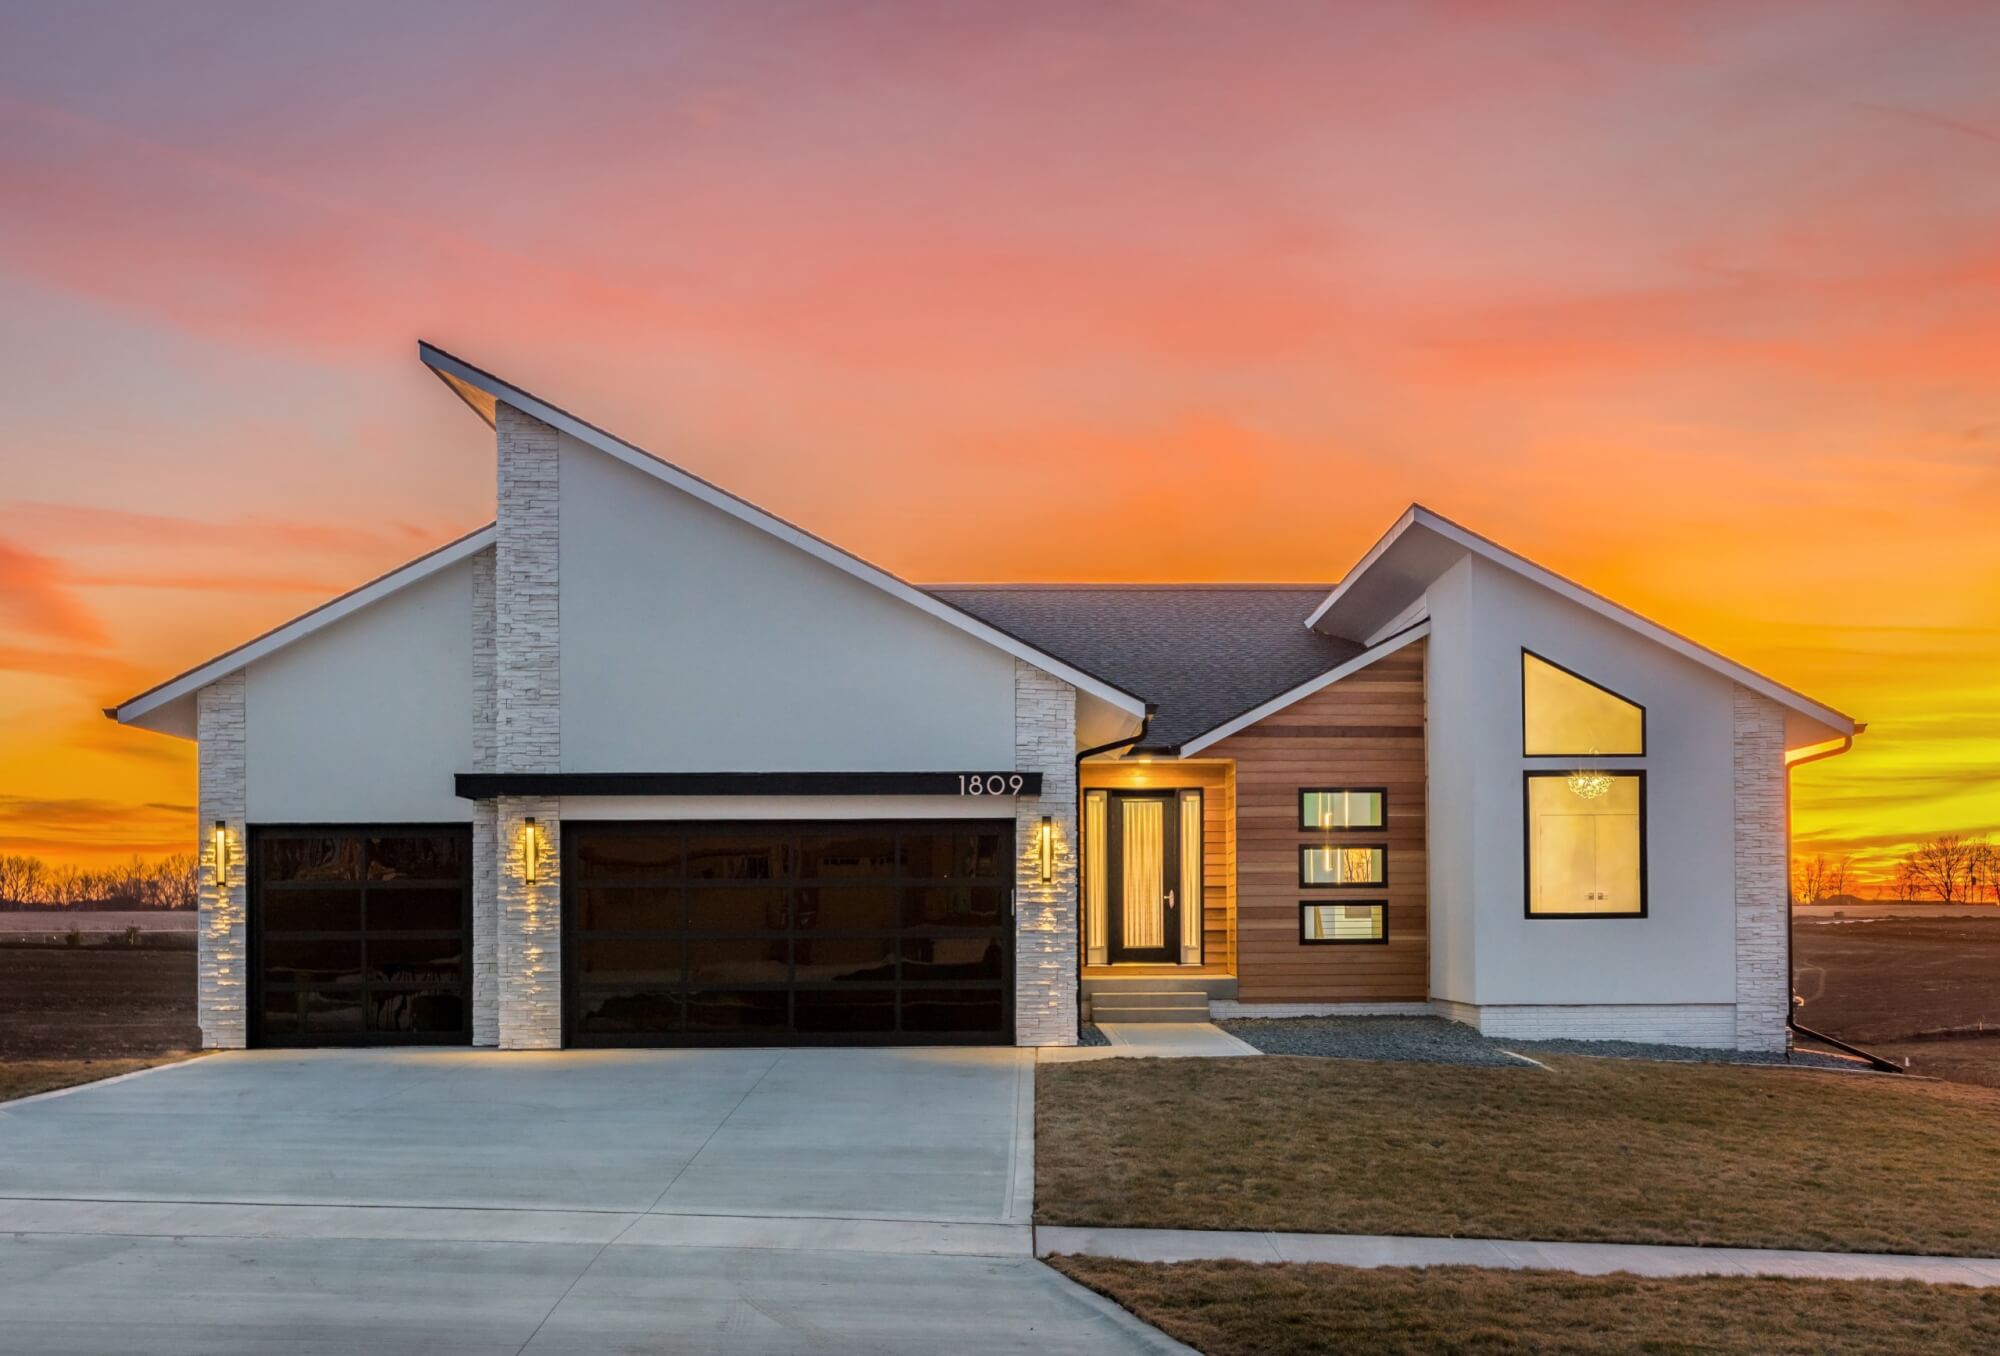 Modern-style custom-built home by Kruse Development with a white and wooden exterior, along with a sunset in the background.